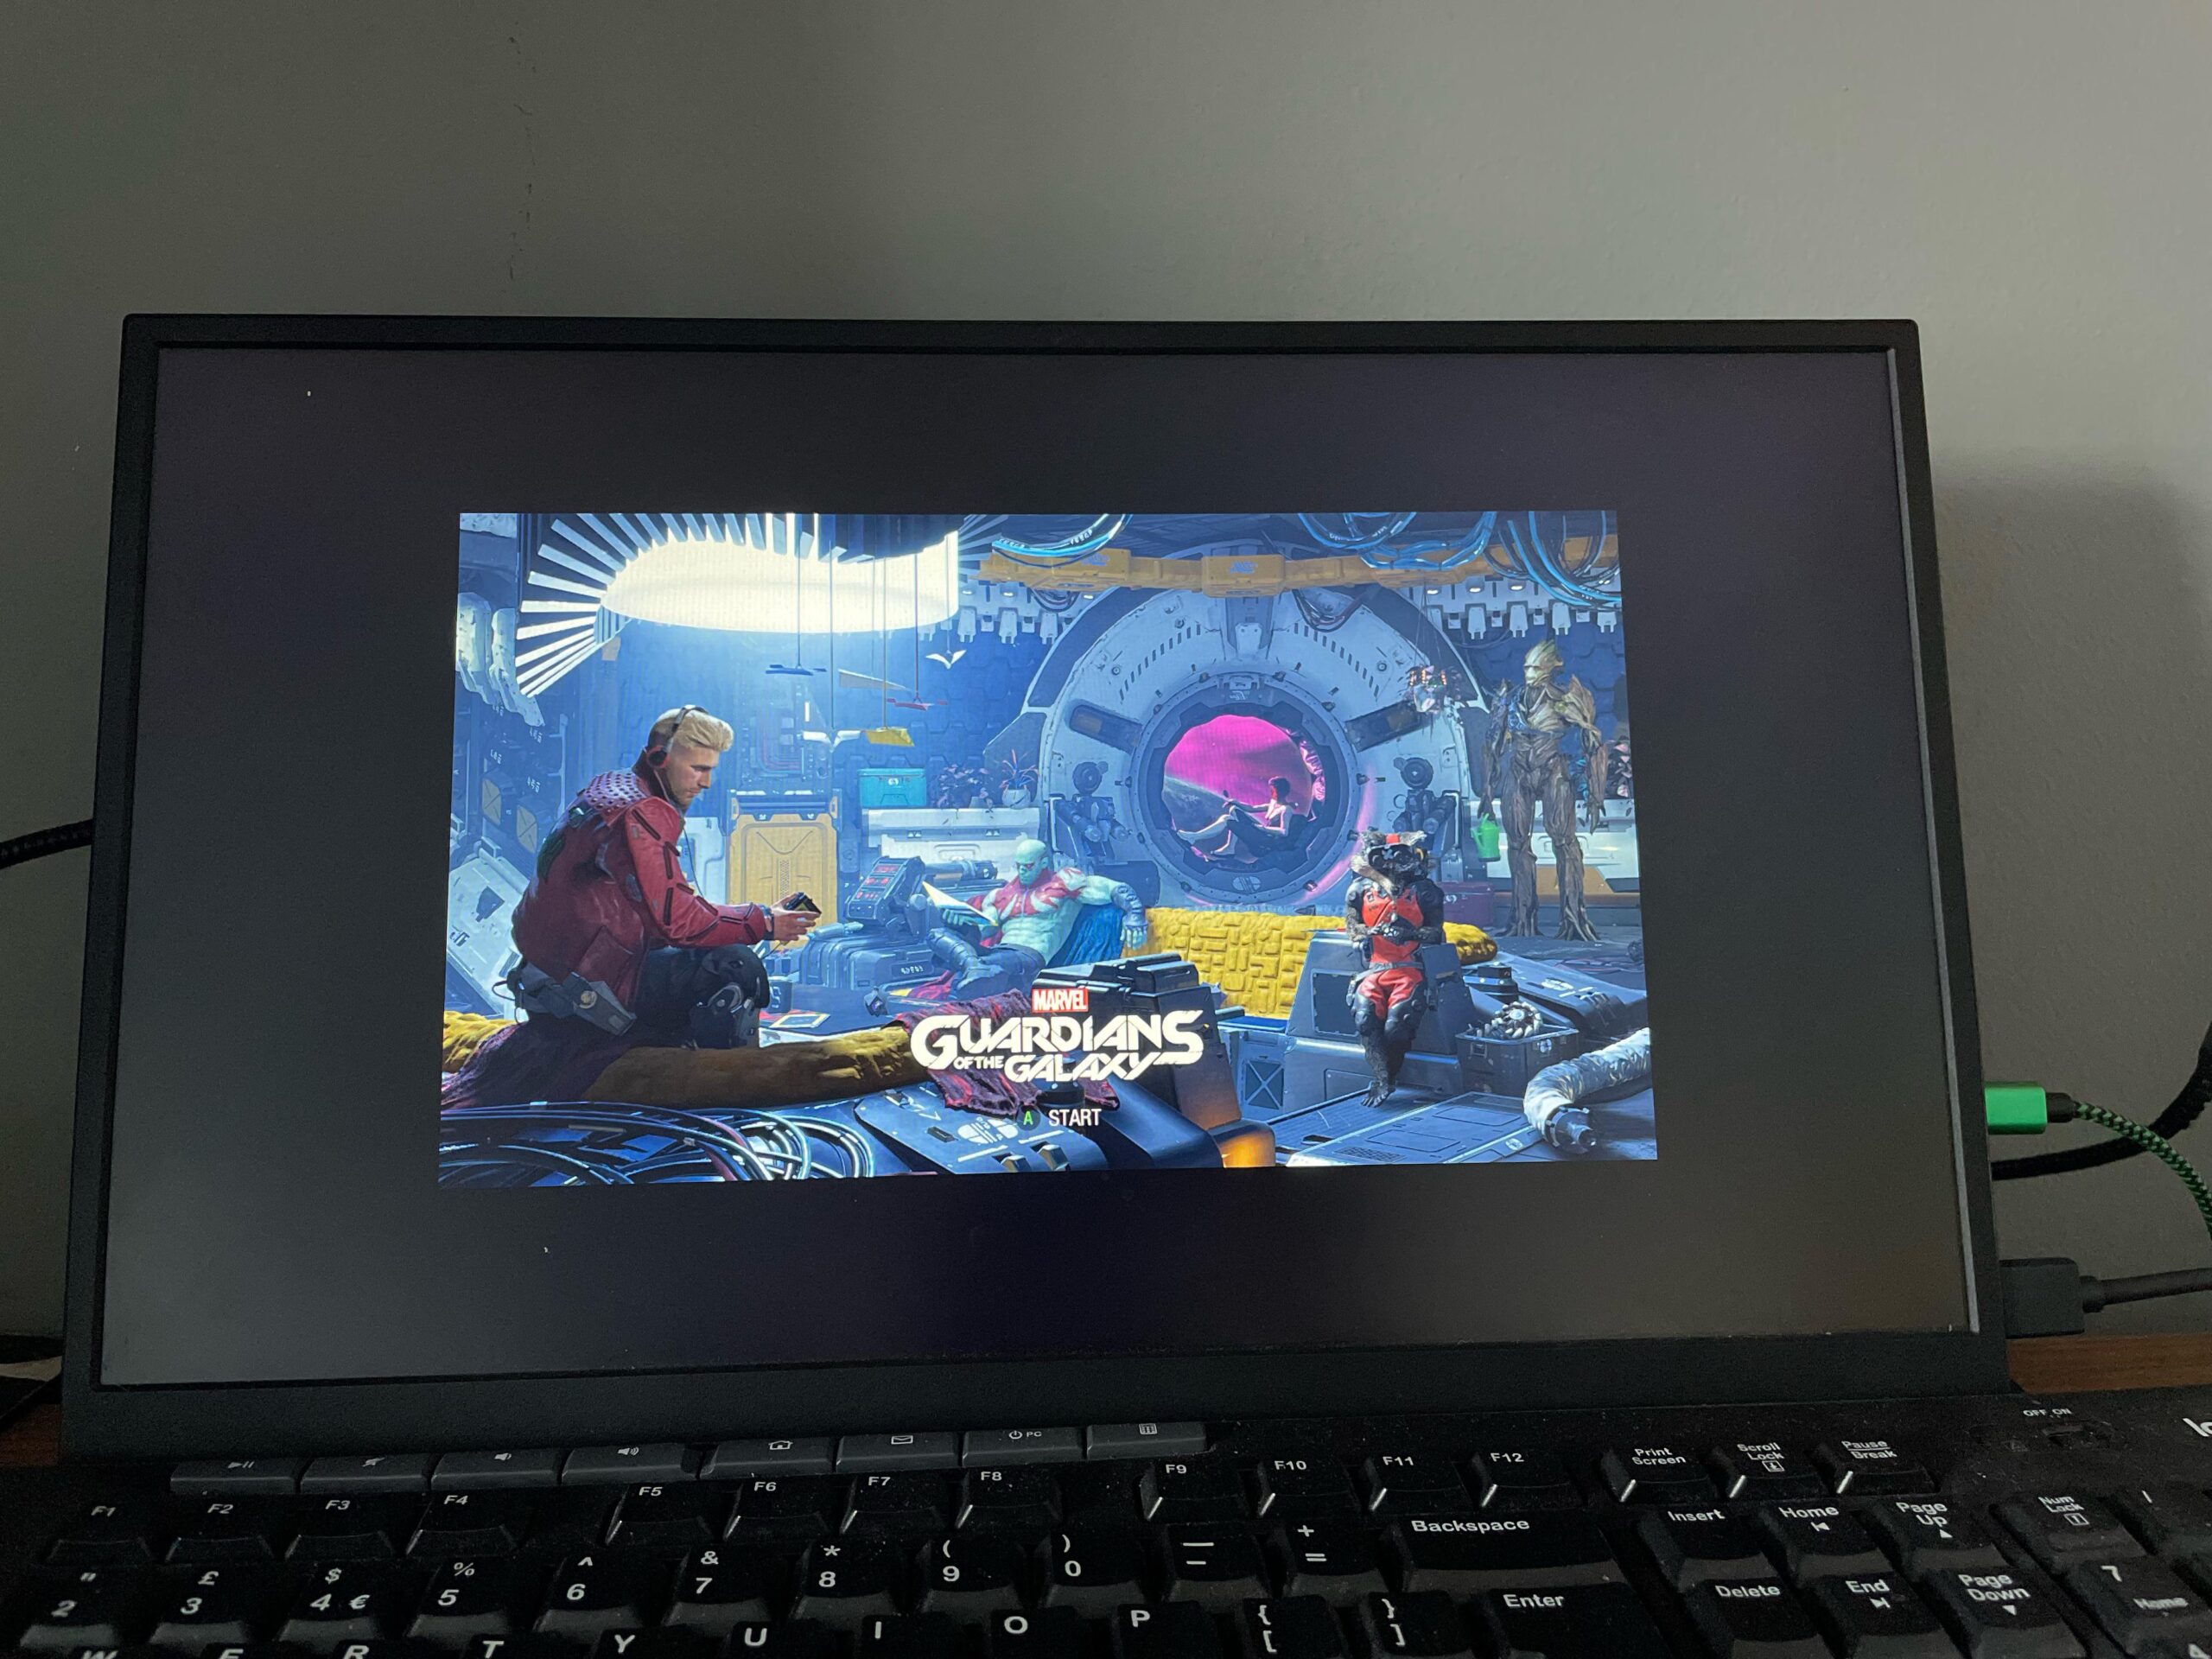 Full Screen Not Showing on Monitor